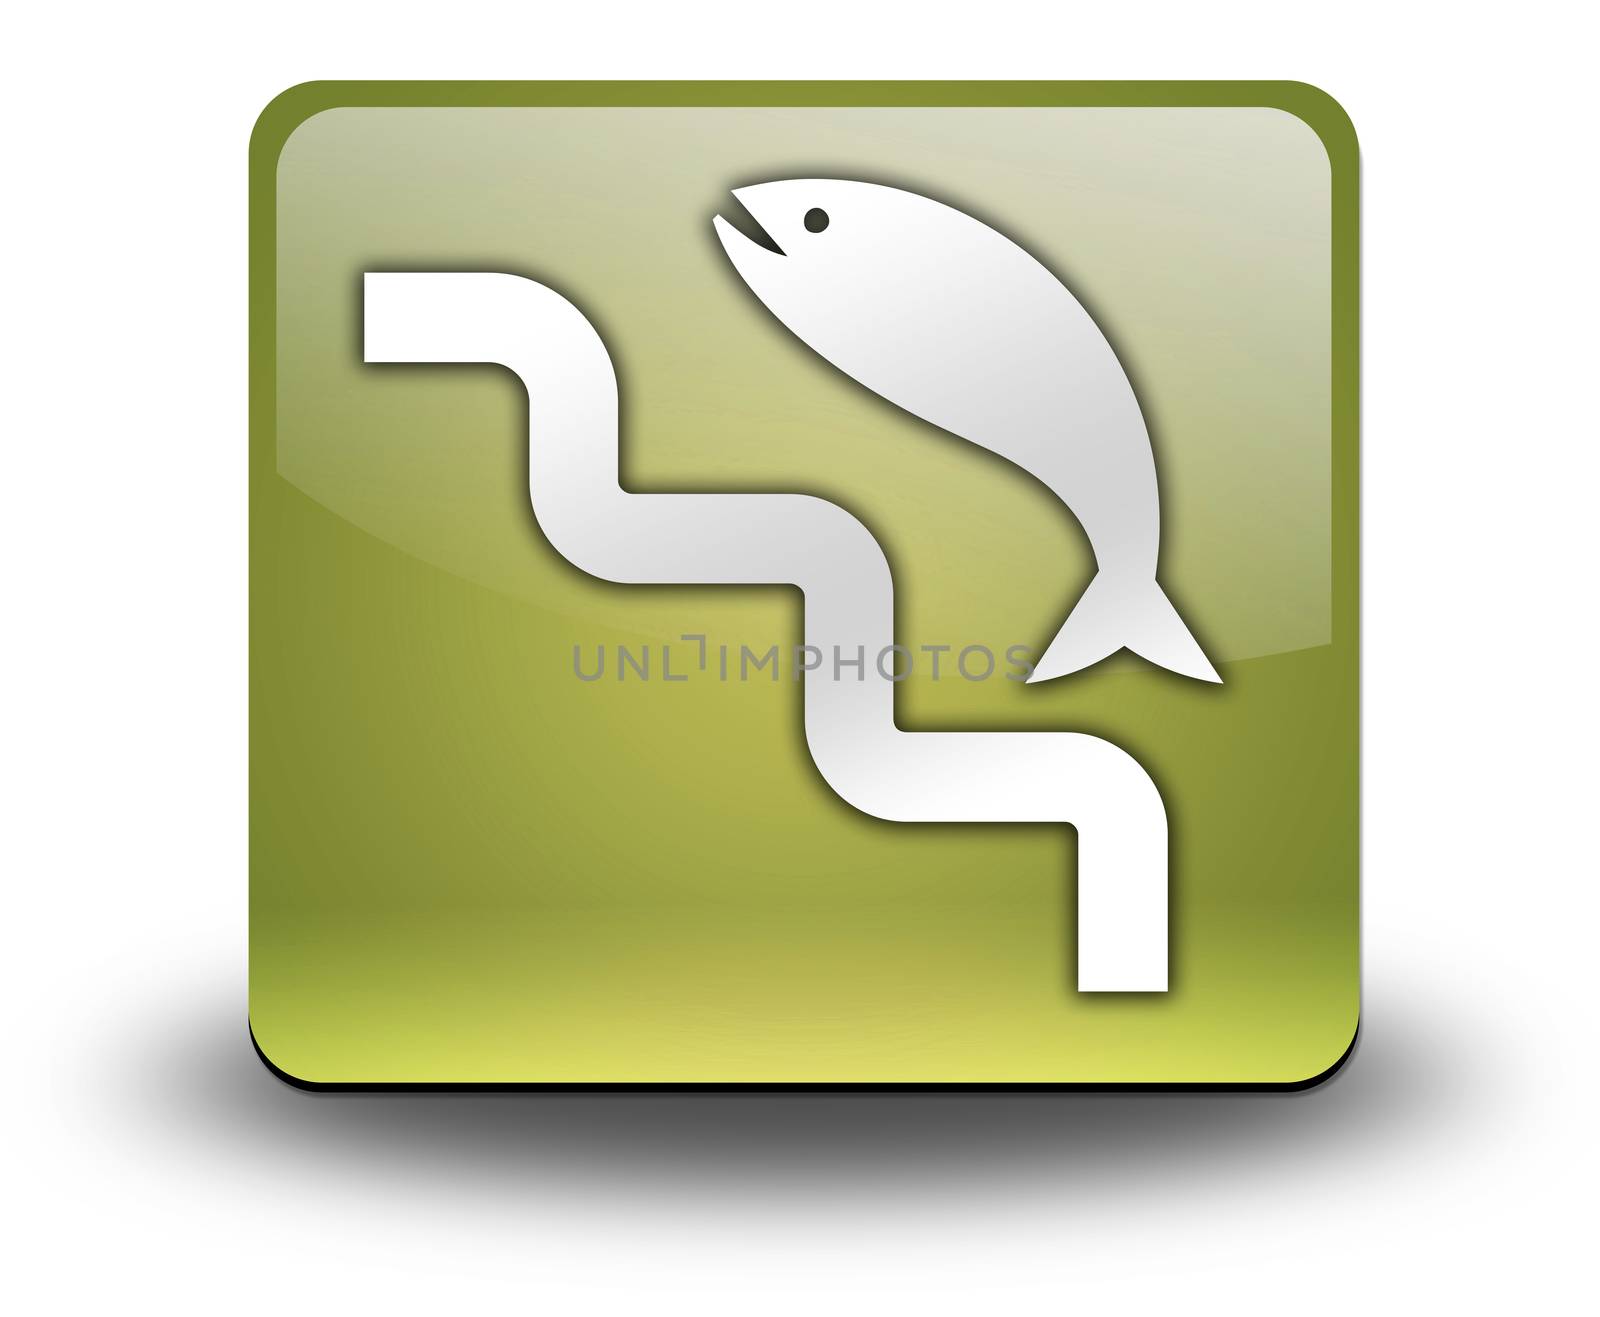 Icon, Button, Pictogram Fish Ladder by mindscanner